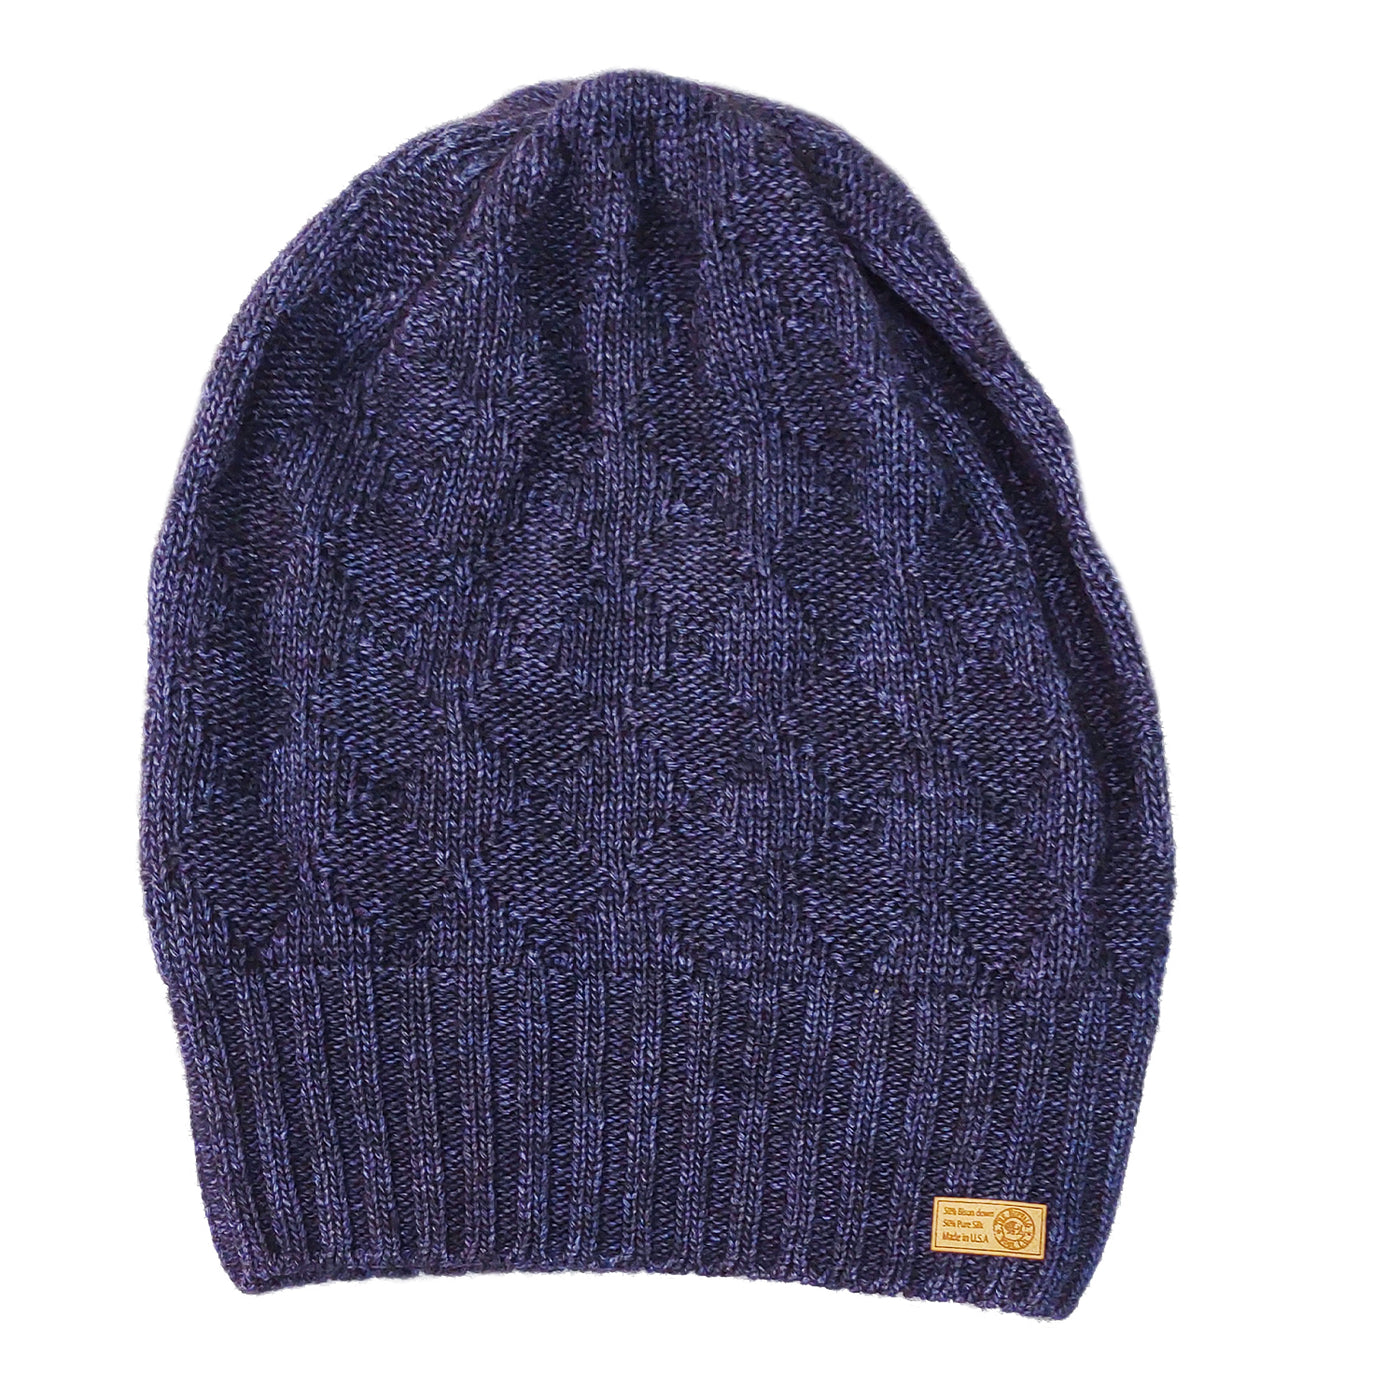 Beanie Slouched Bison